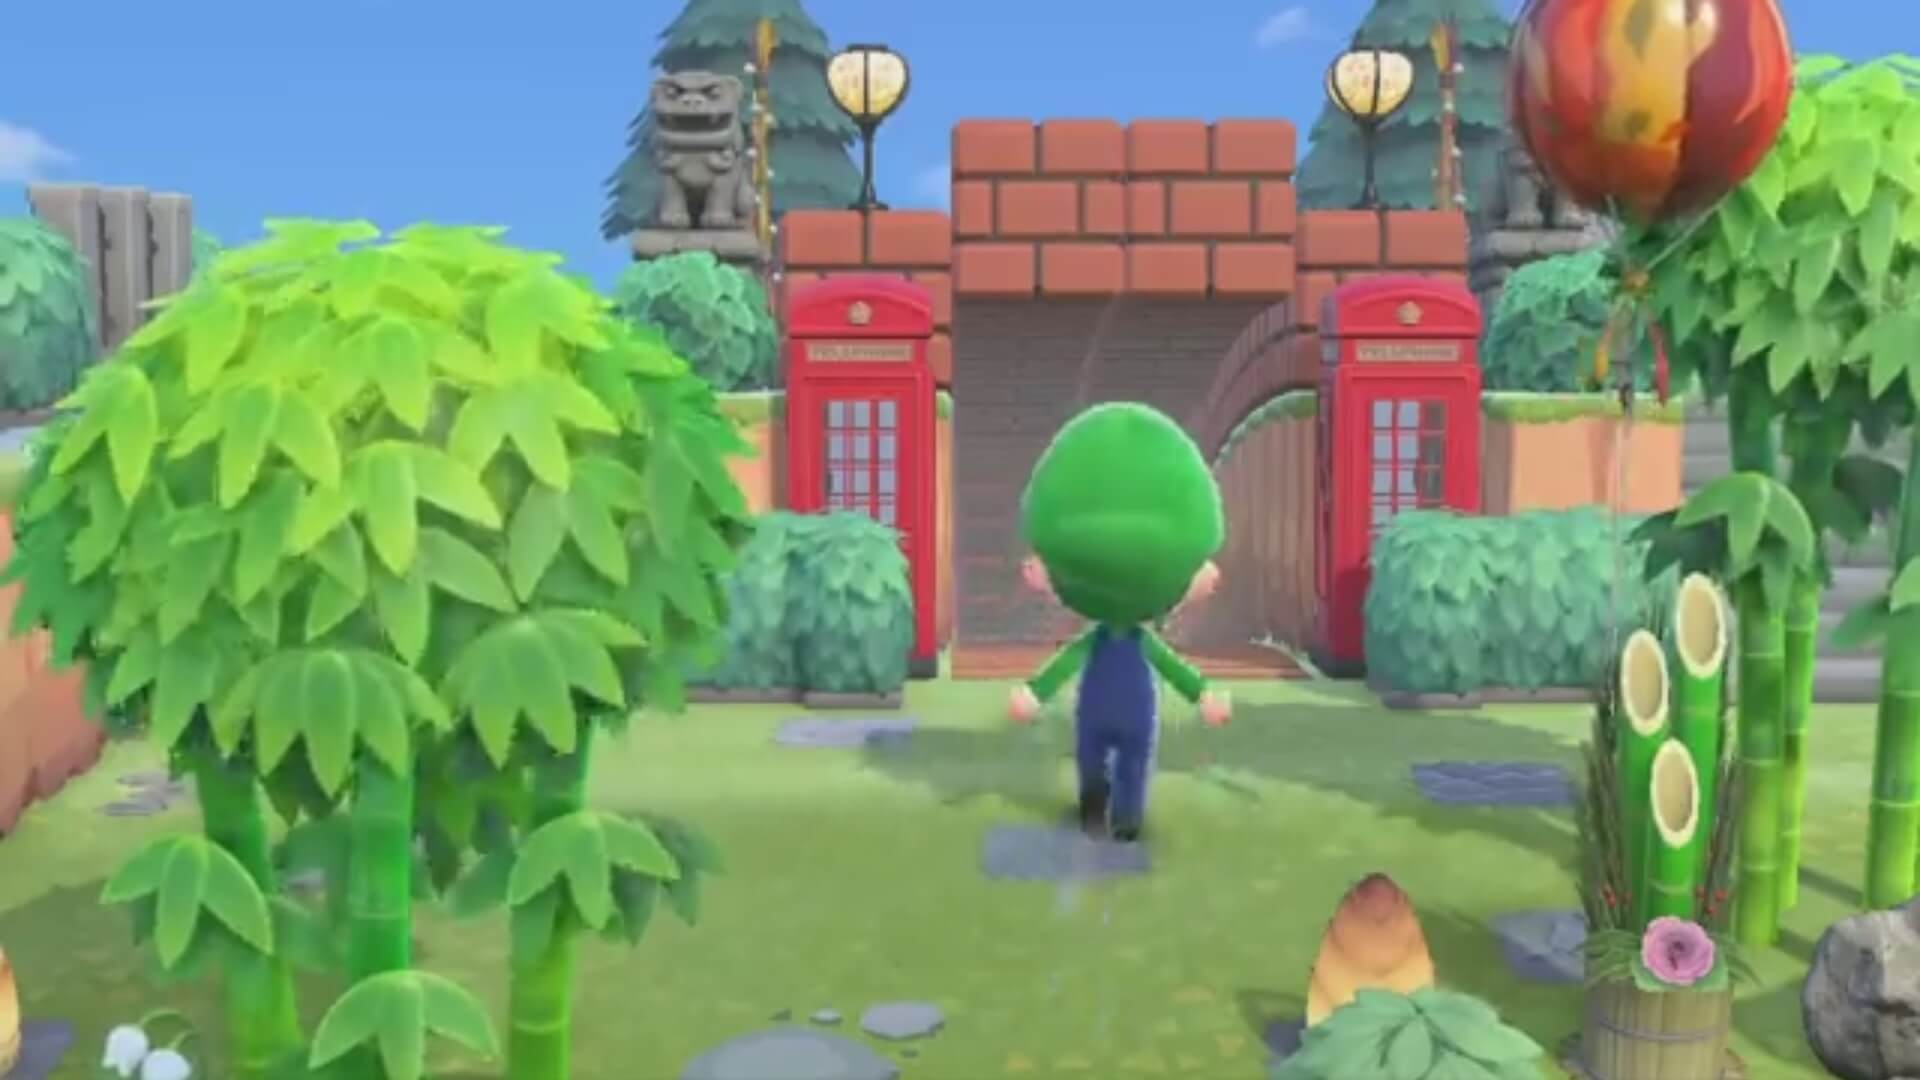 A villager demonstrating a tunnel they made in Animal Crossing: New Horizons.